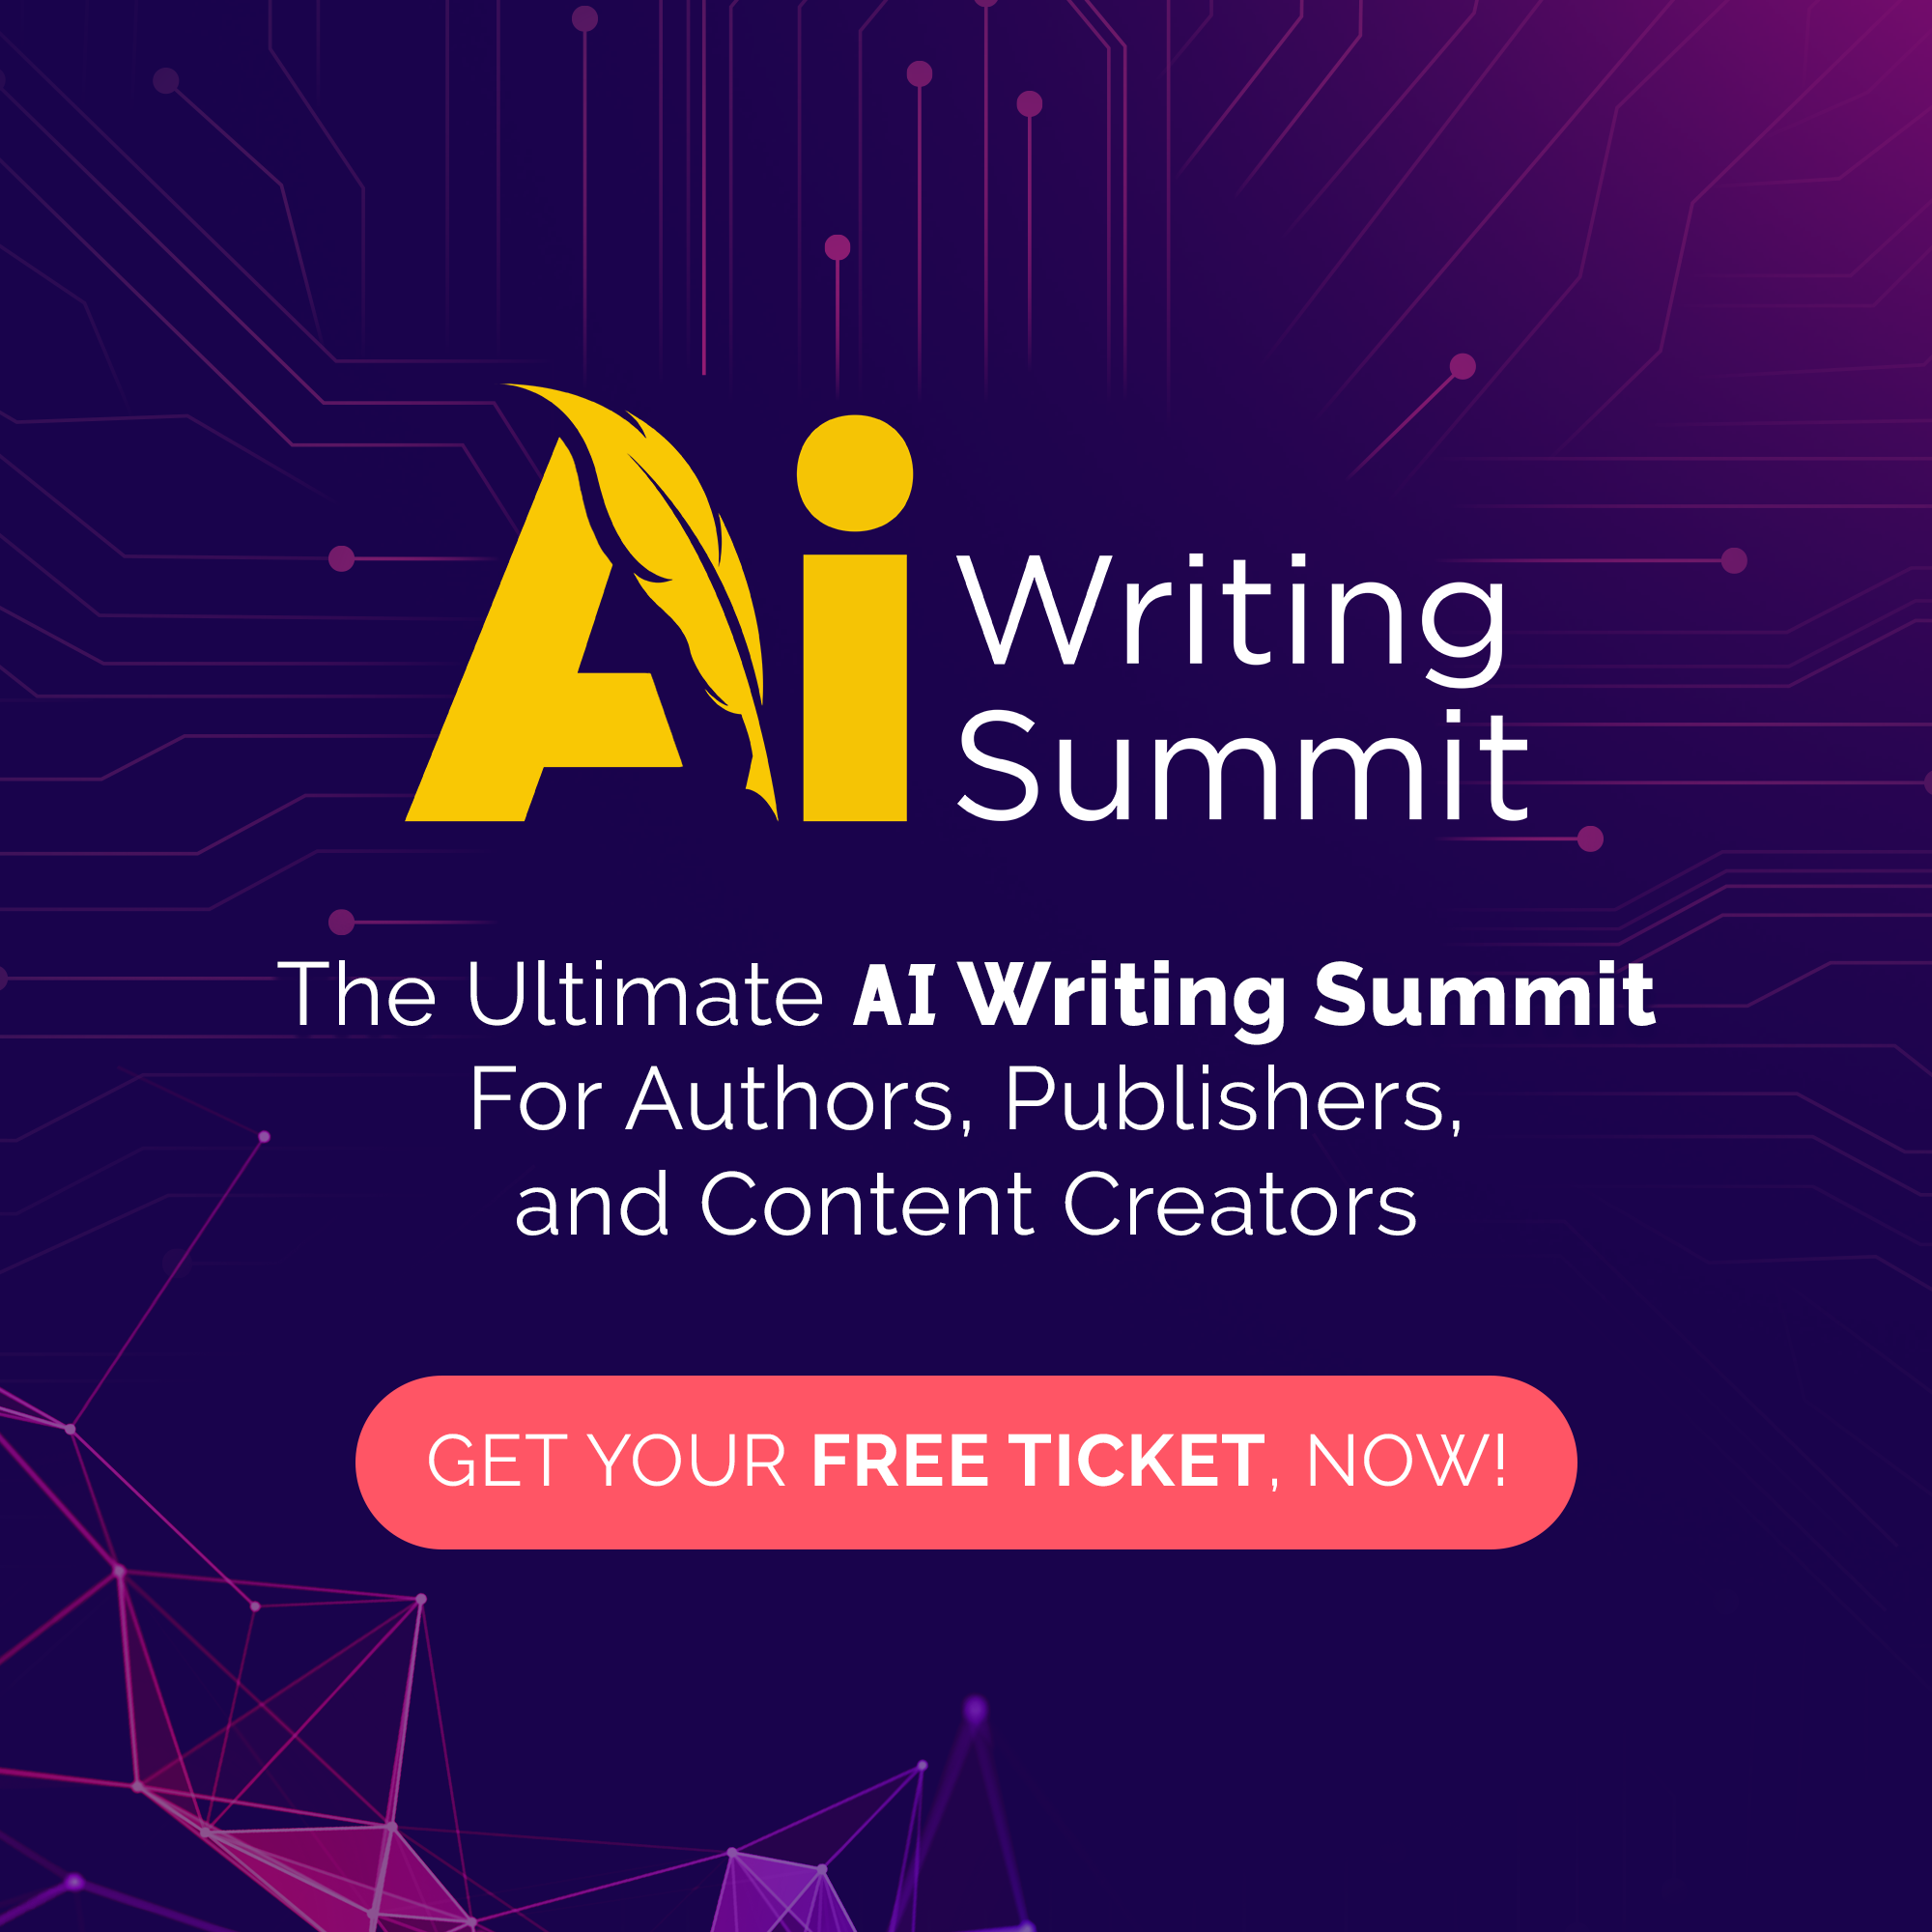 The Ultimate AI Writing Summit For Authors, Bloggers, Writers, Publishers, and Content Creators